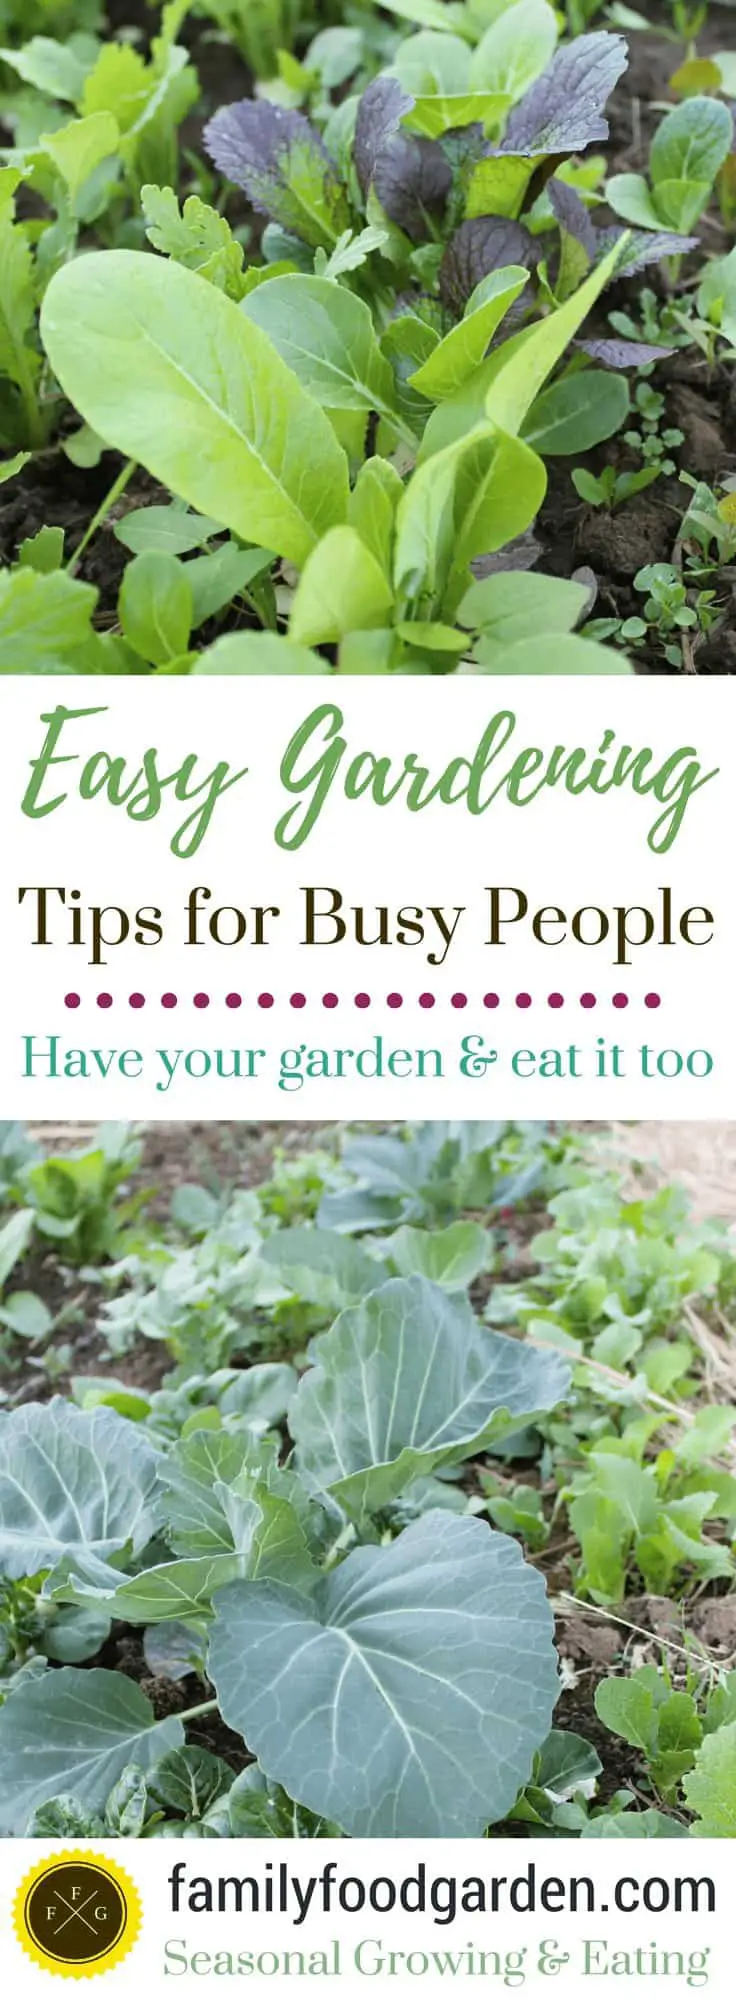 Easy Gardening Tips For Busy People: Have Your Garden & Eat It Too